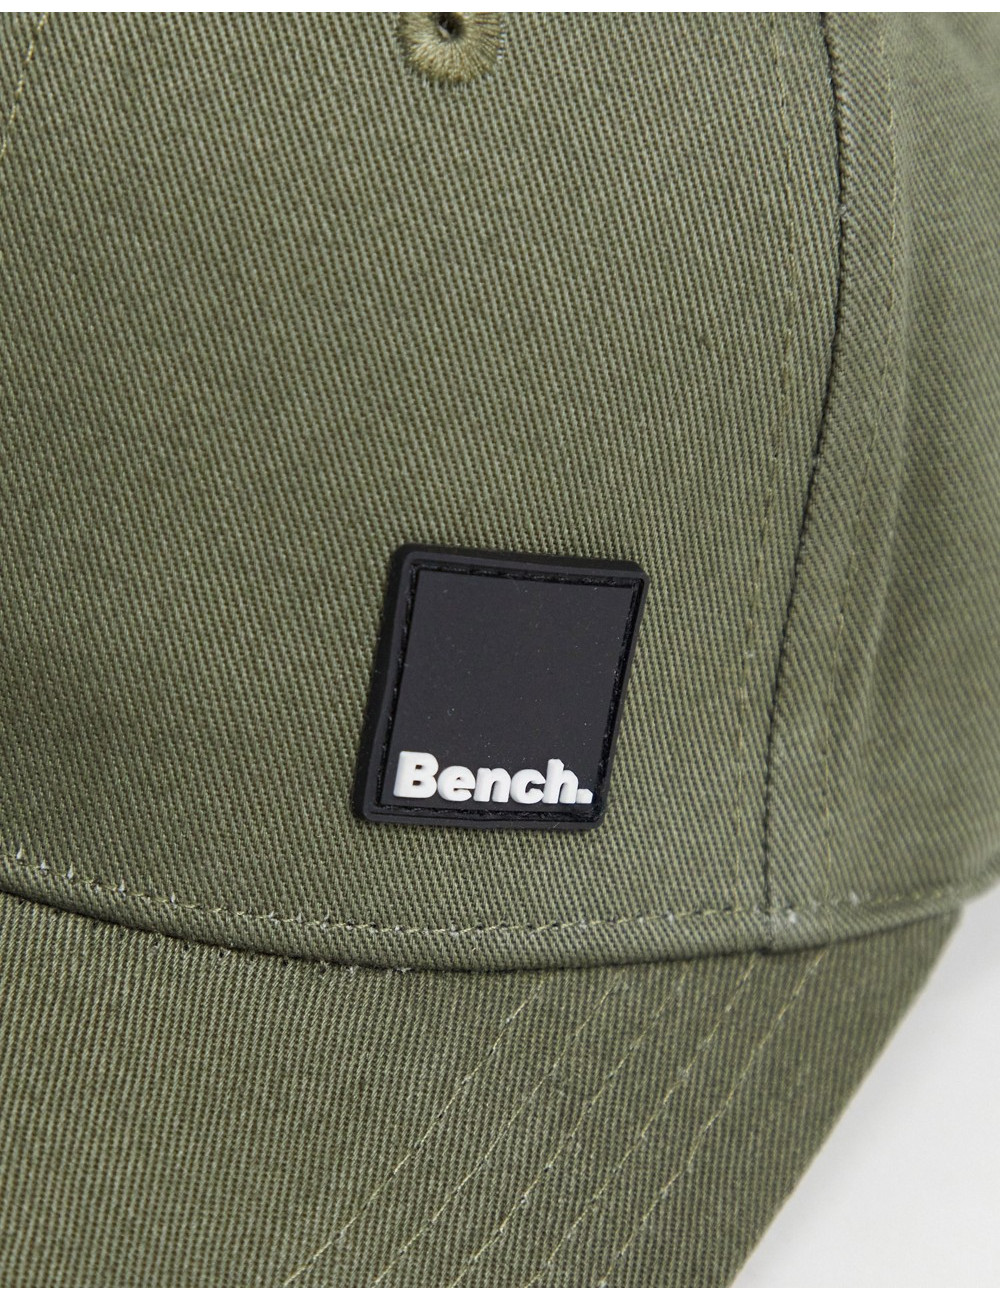 Bench small logo cap in olive